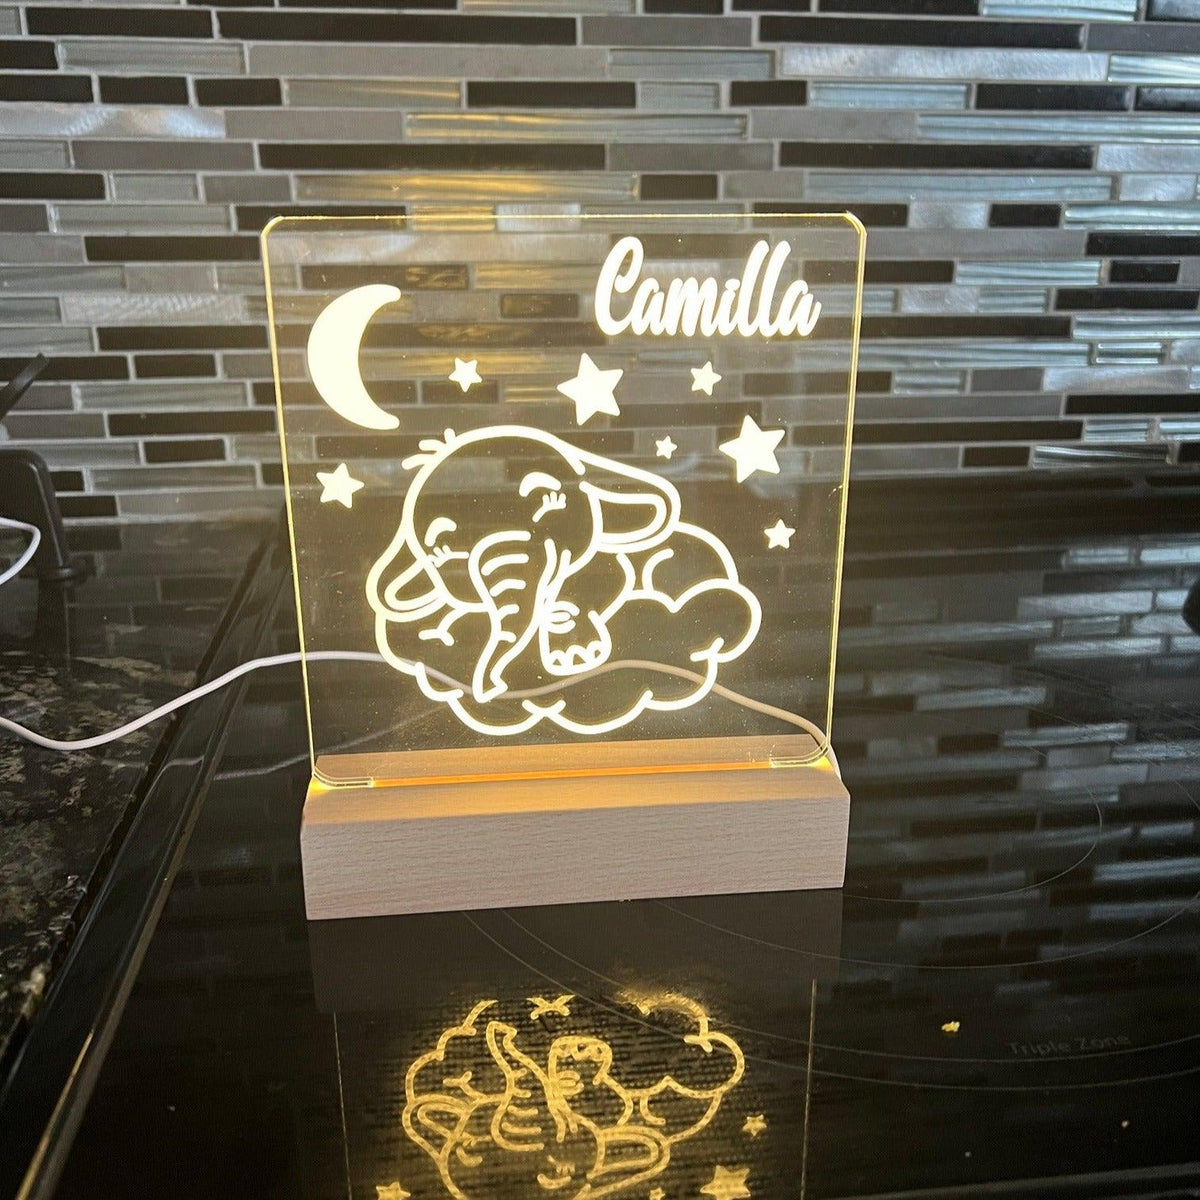 Elephant - Personalized Night Light - Brighter Made